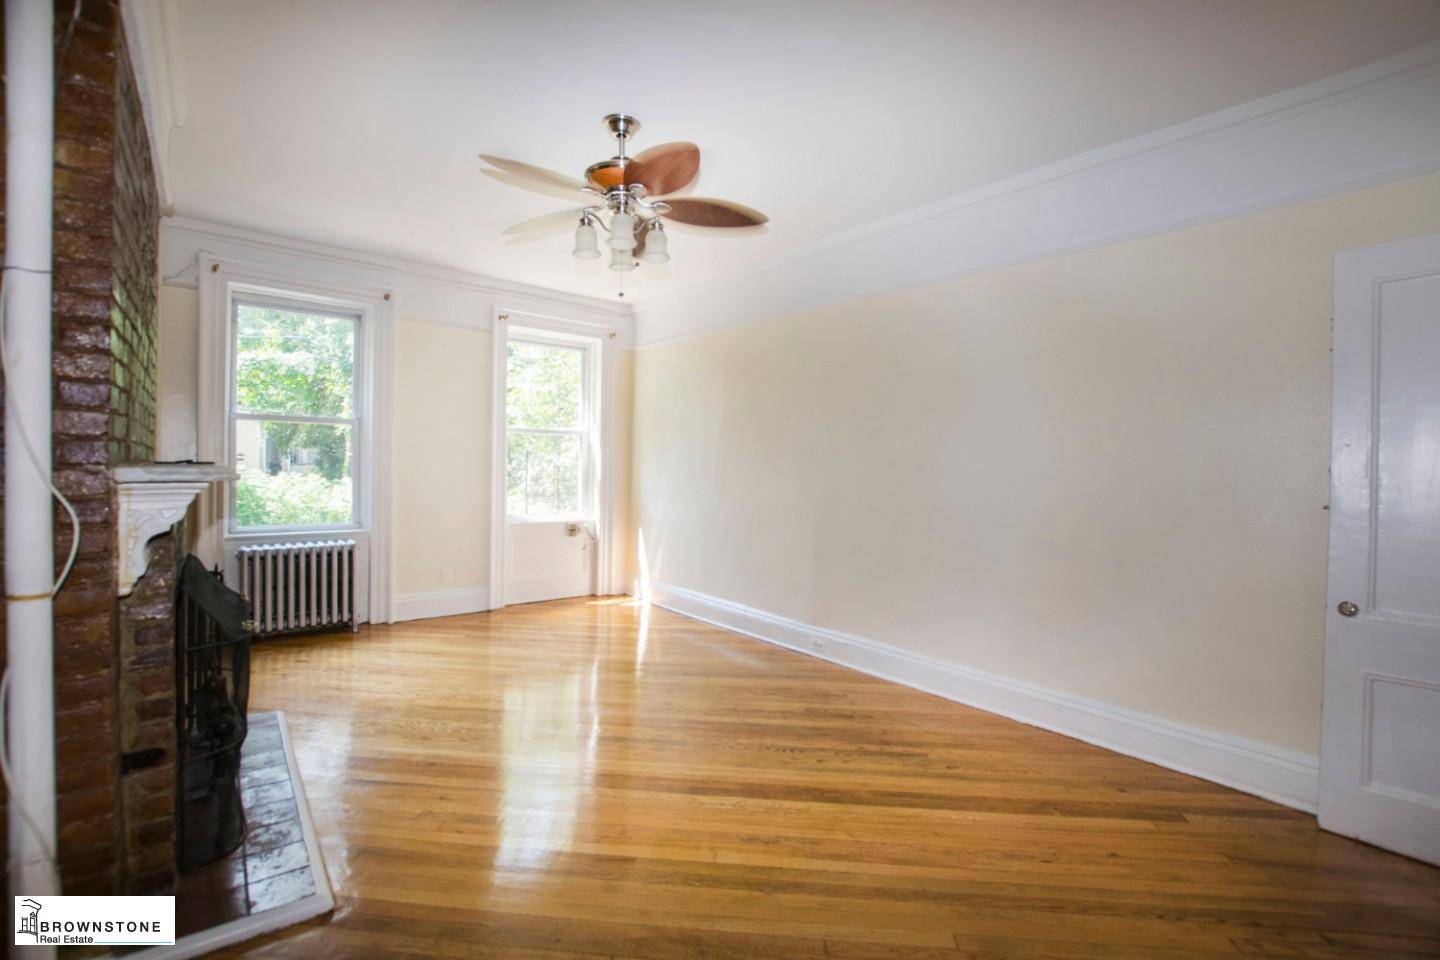 Chance of a lifetime to rent this charming one family brownstone in Cobble Hill.